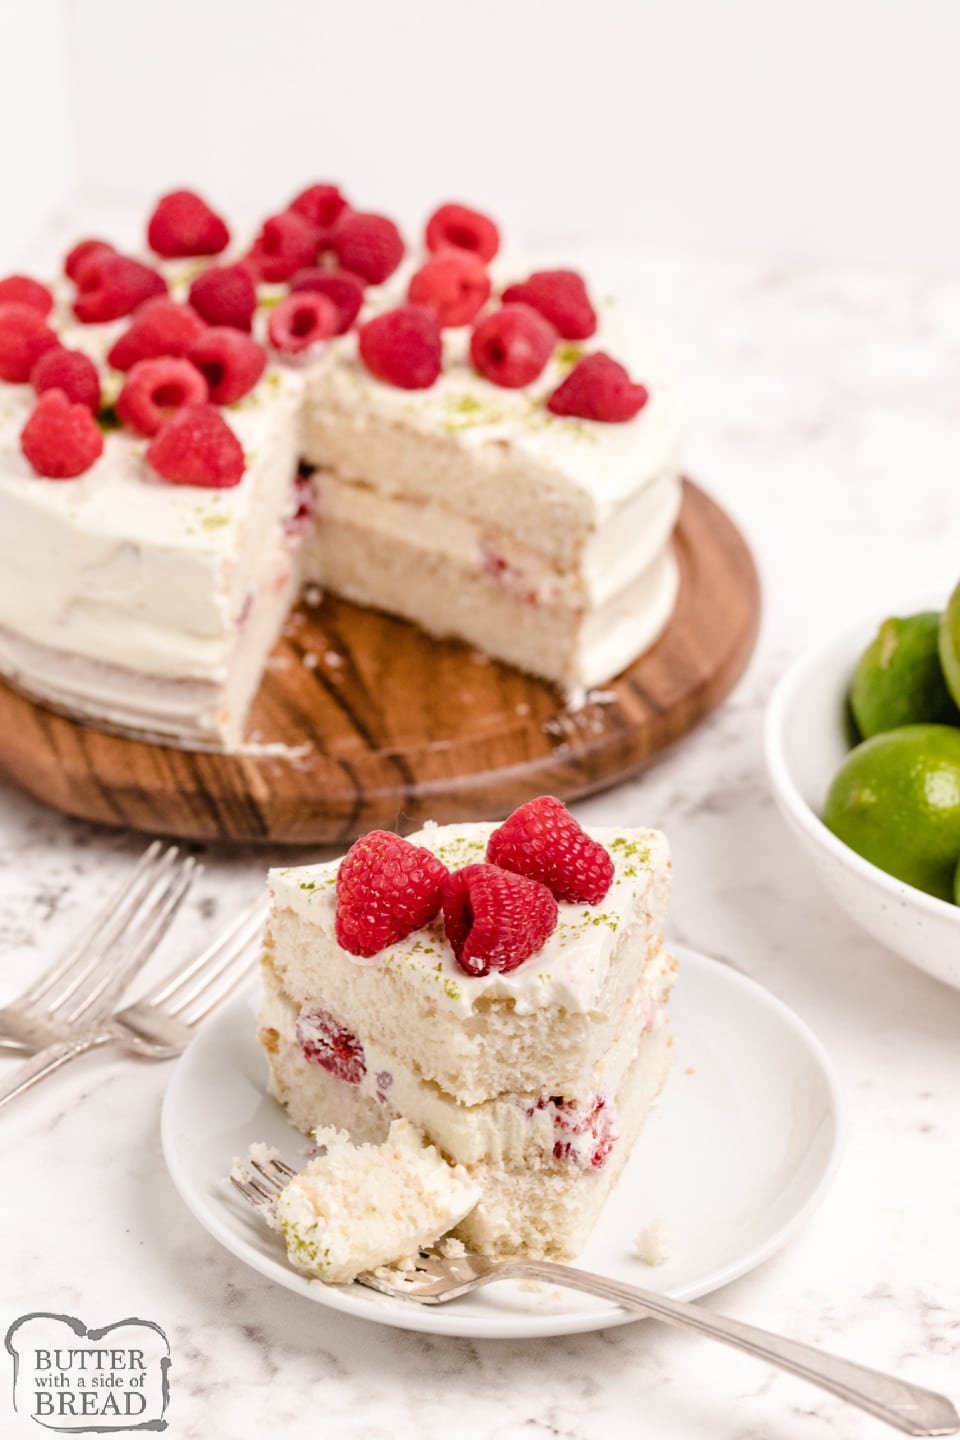 Layered cake with raspberries and tons of lime flavor